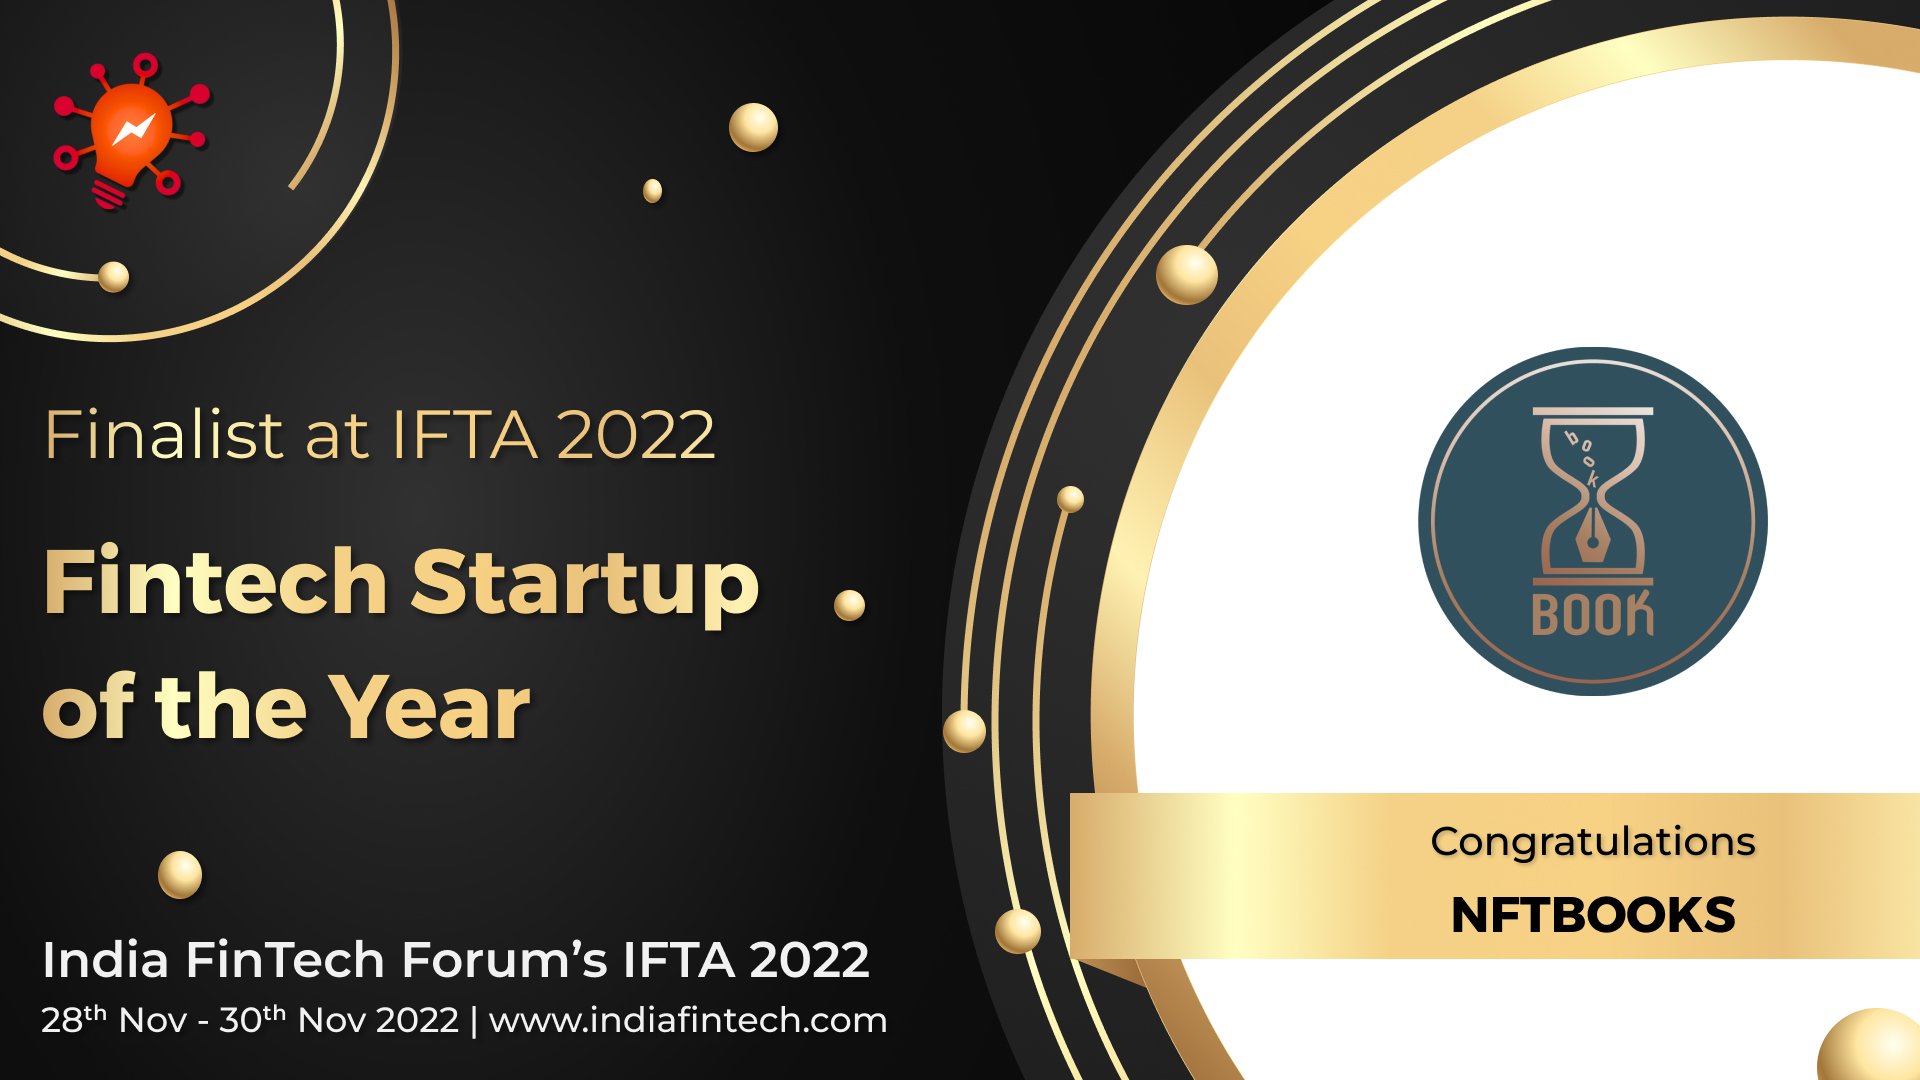 NFTBOOKS advanced to the final round of India FinTech Award 2022's FinTech Startup of the Year competition